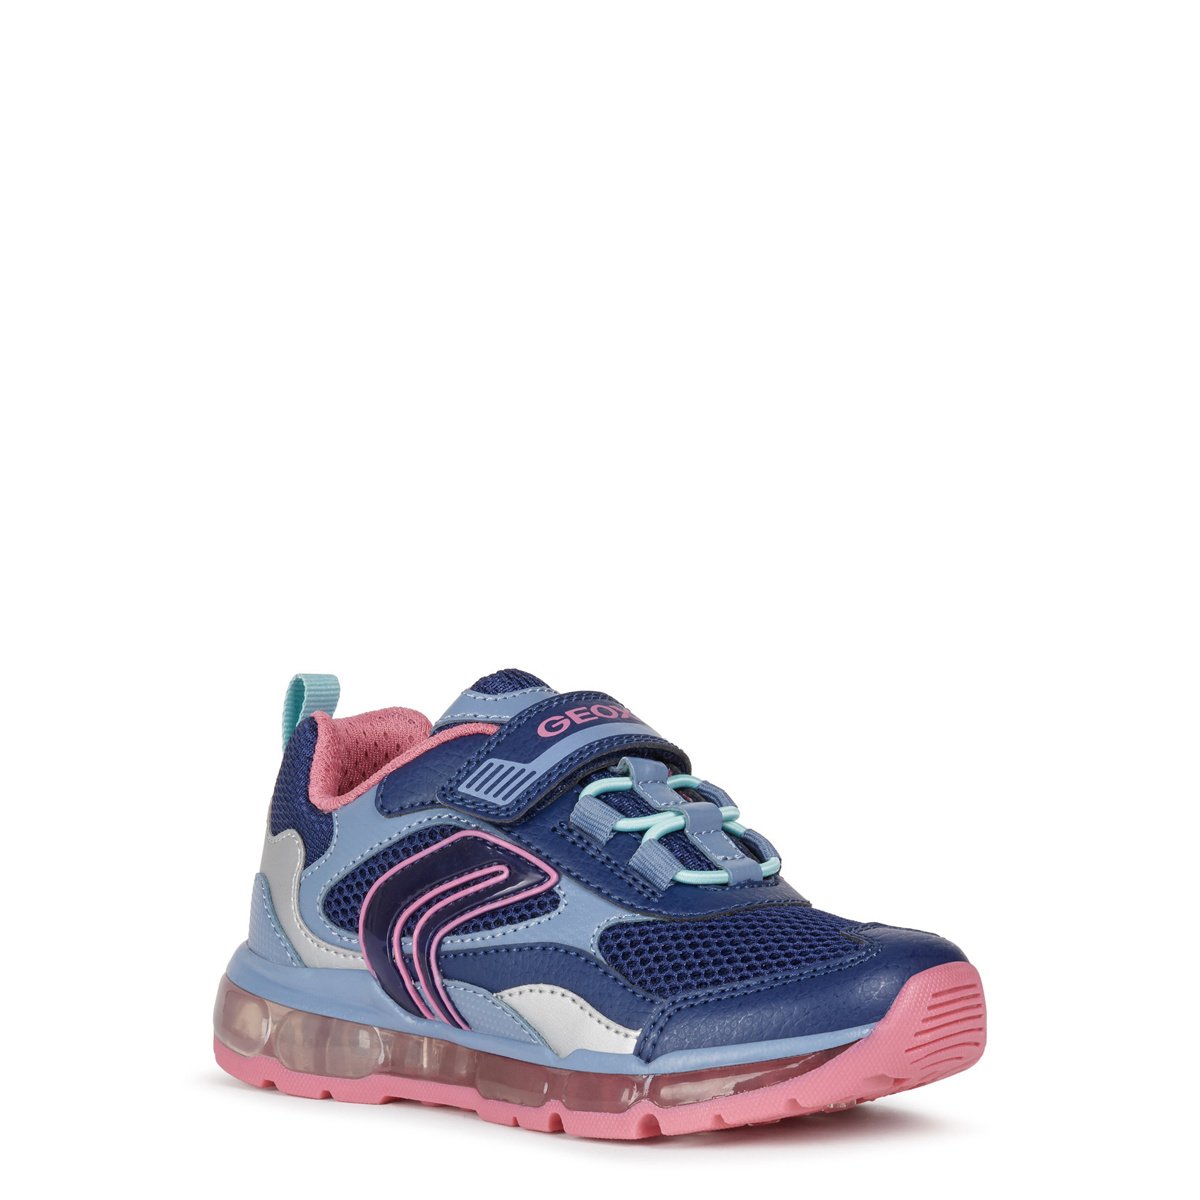 Geox Android Navy Fuchsia Trainers - Shoes for Children